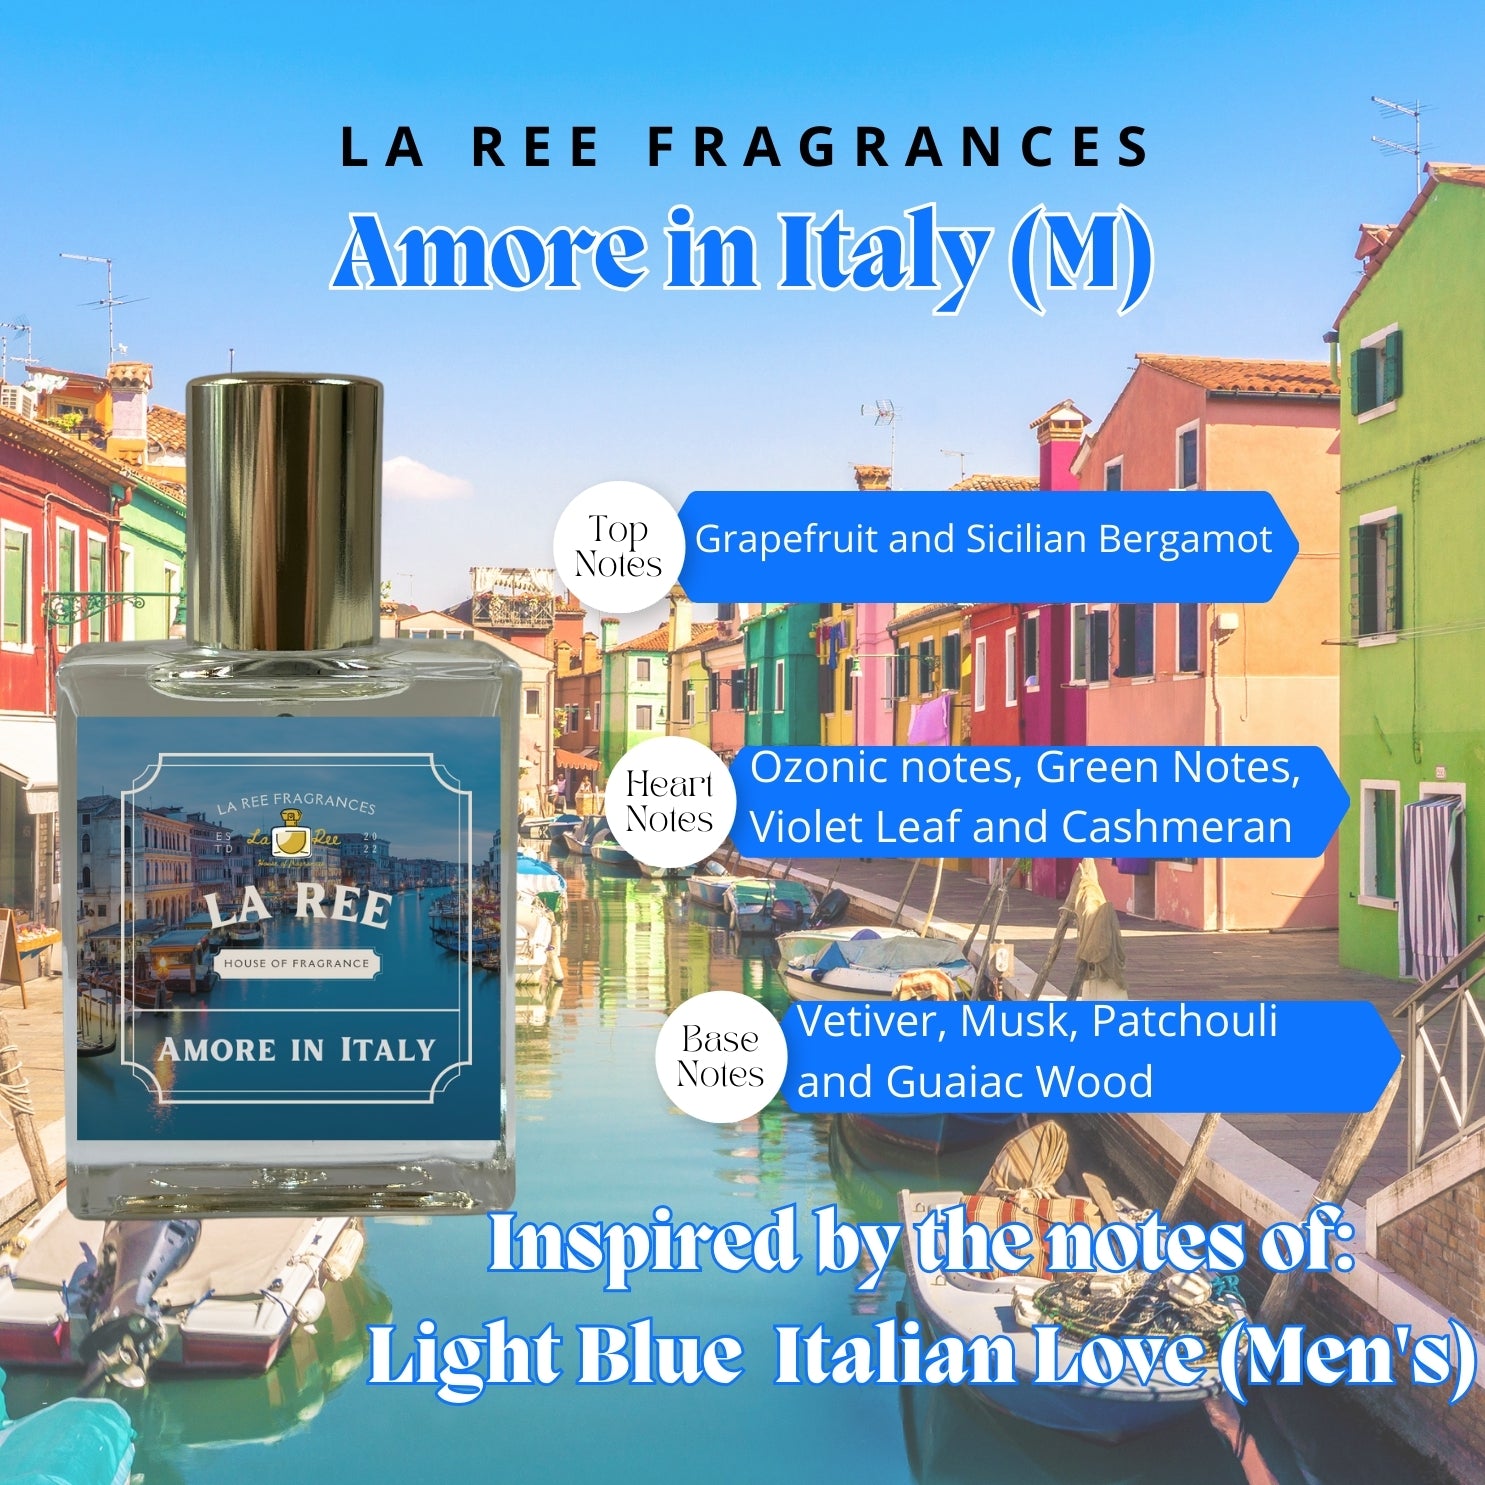 La Ree Amore in Italy inspired by D&G® Light Blue Italian Love